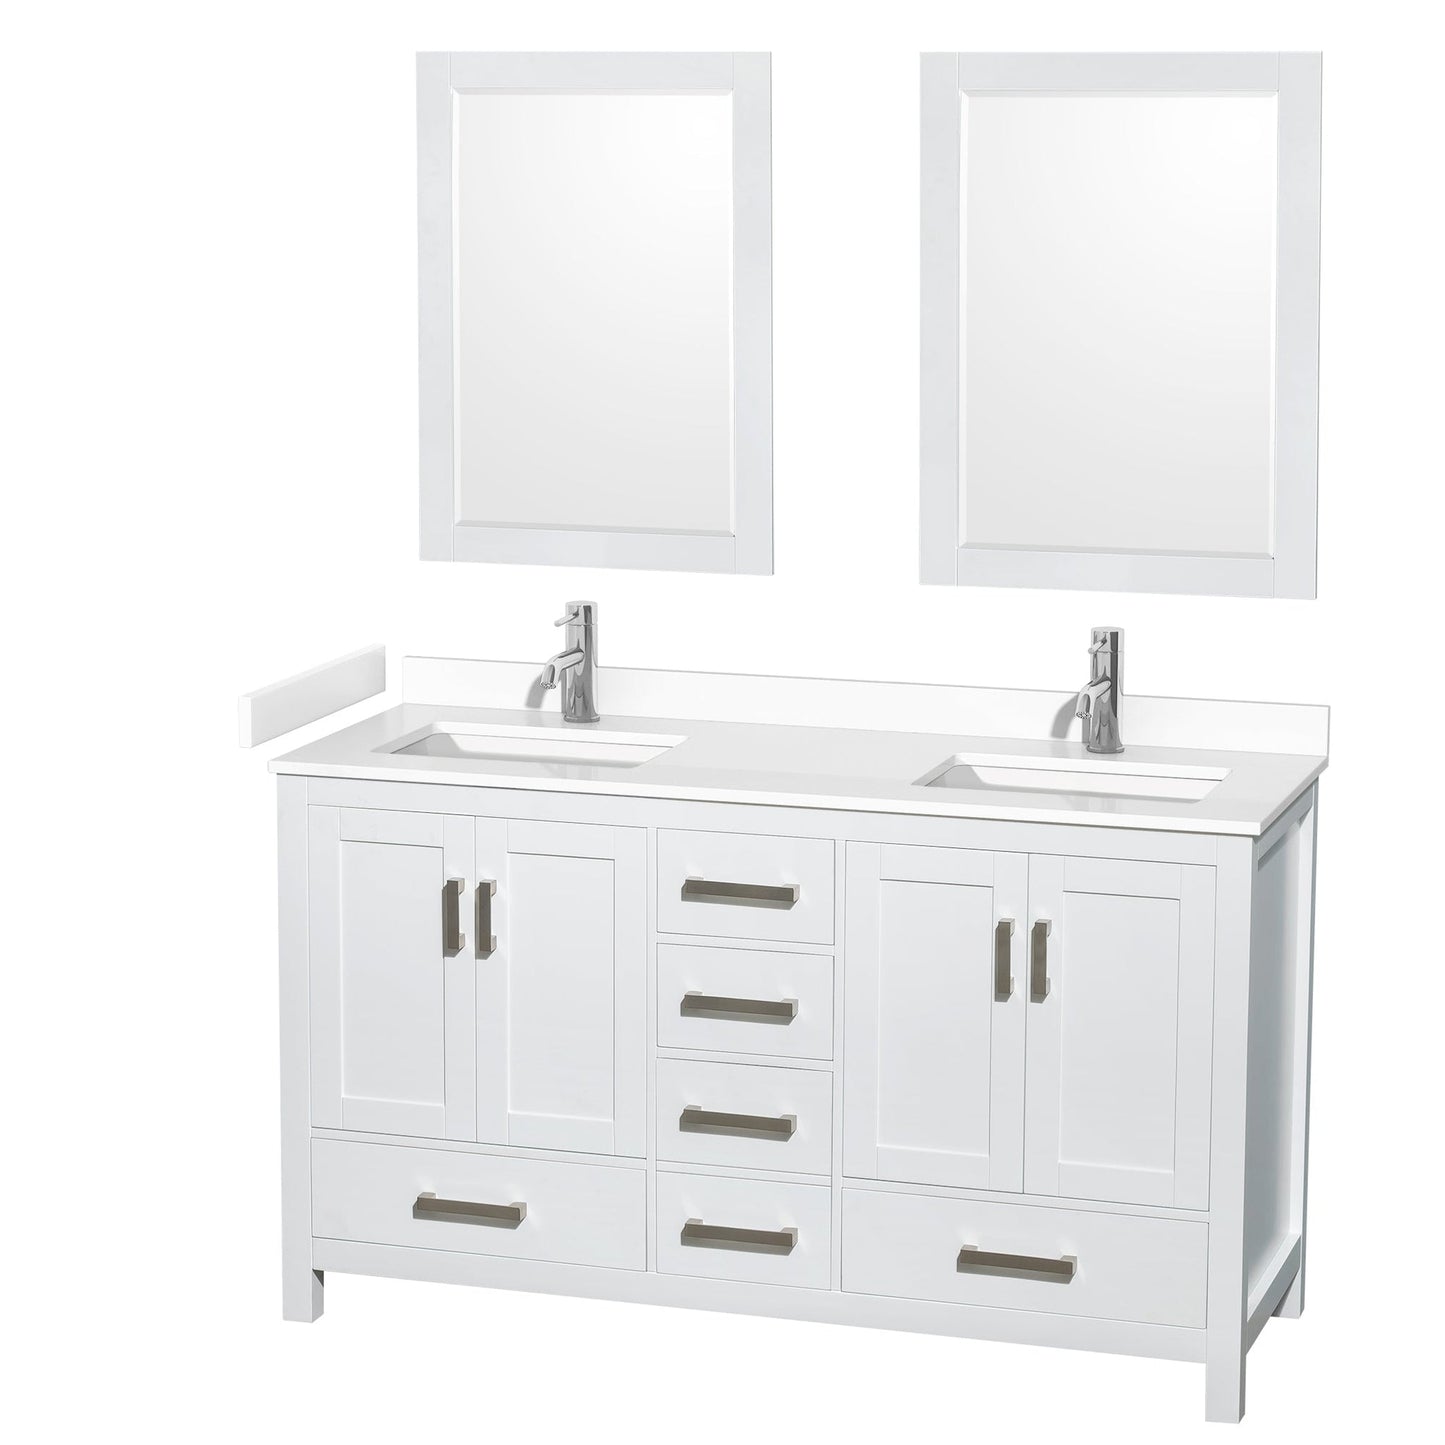 Wyndham Collection Sheffield 60" Double Bathroom Vanity in White, White Cultured Marble Countertop, Undermount Square Sinks, 24" Mirror